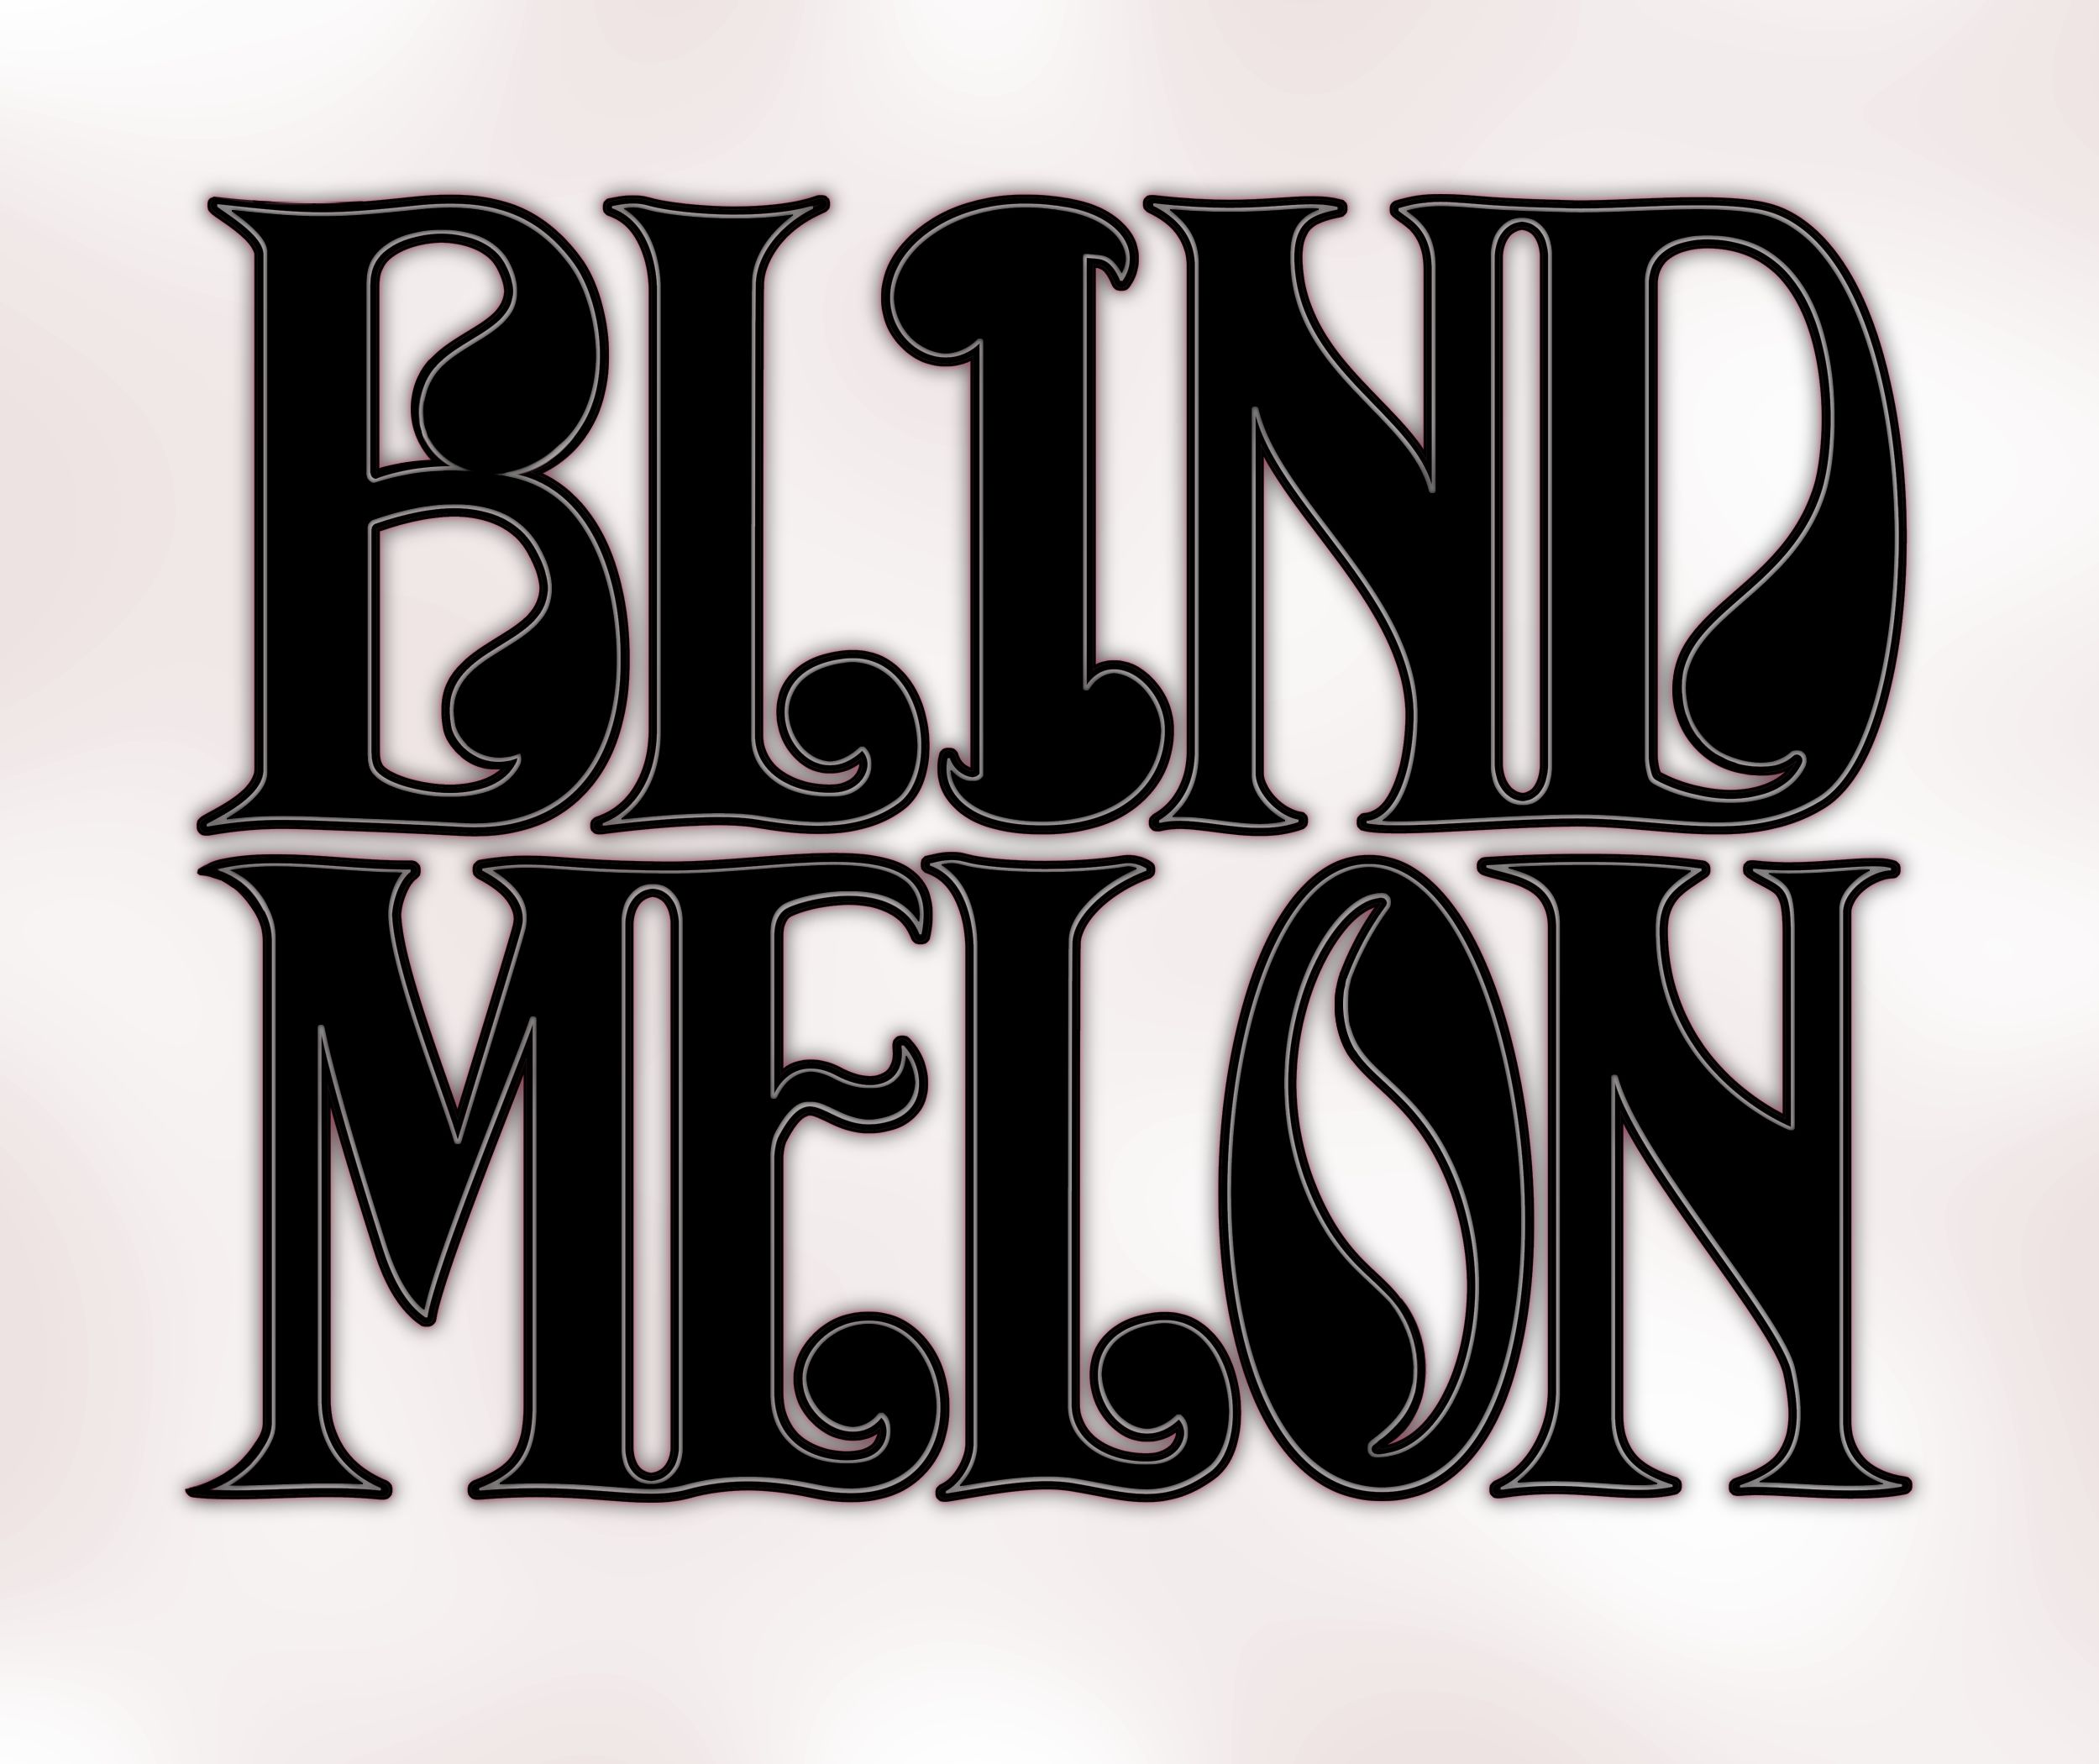 Blind Melon Wallpapers